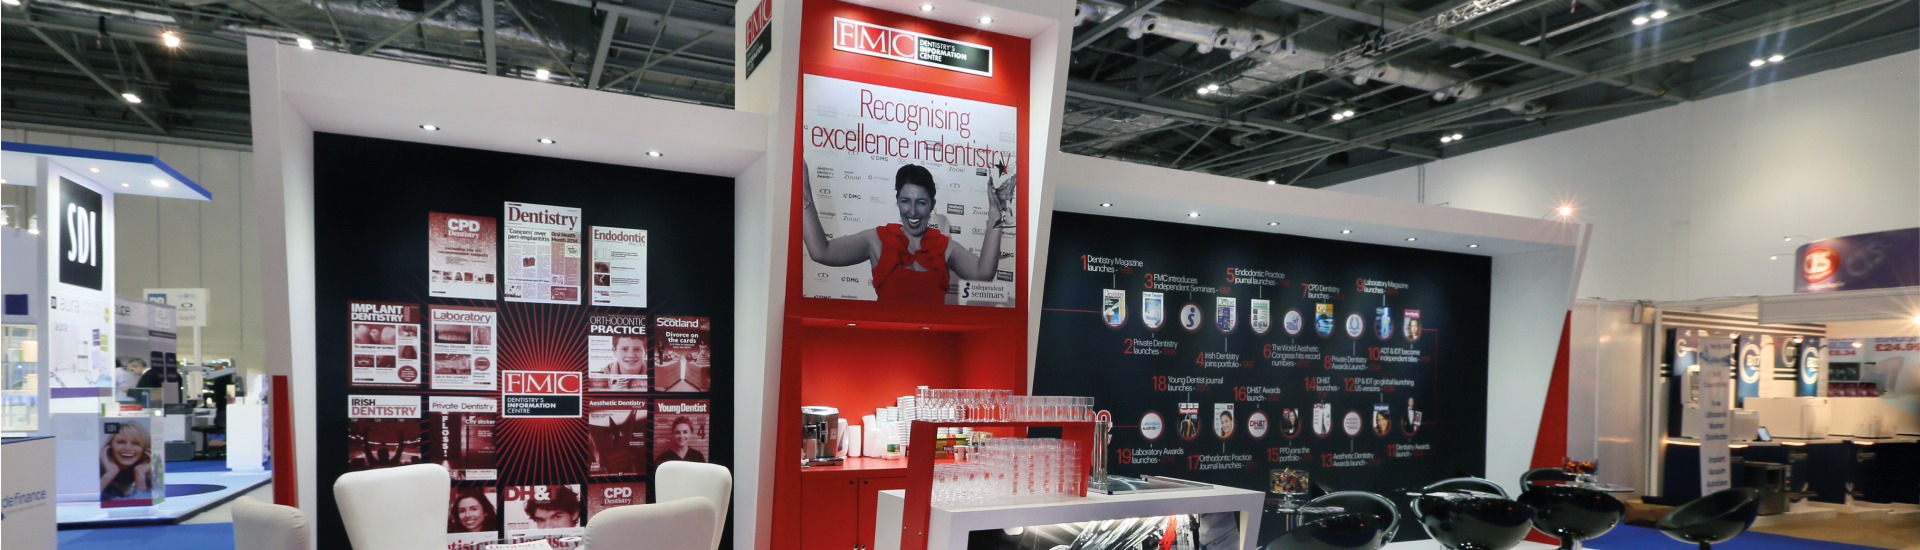 FMC - Bespoke Exhibition Stand - Imagine Events